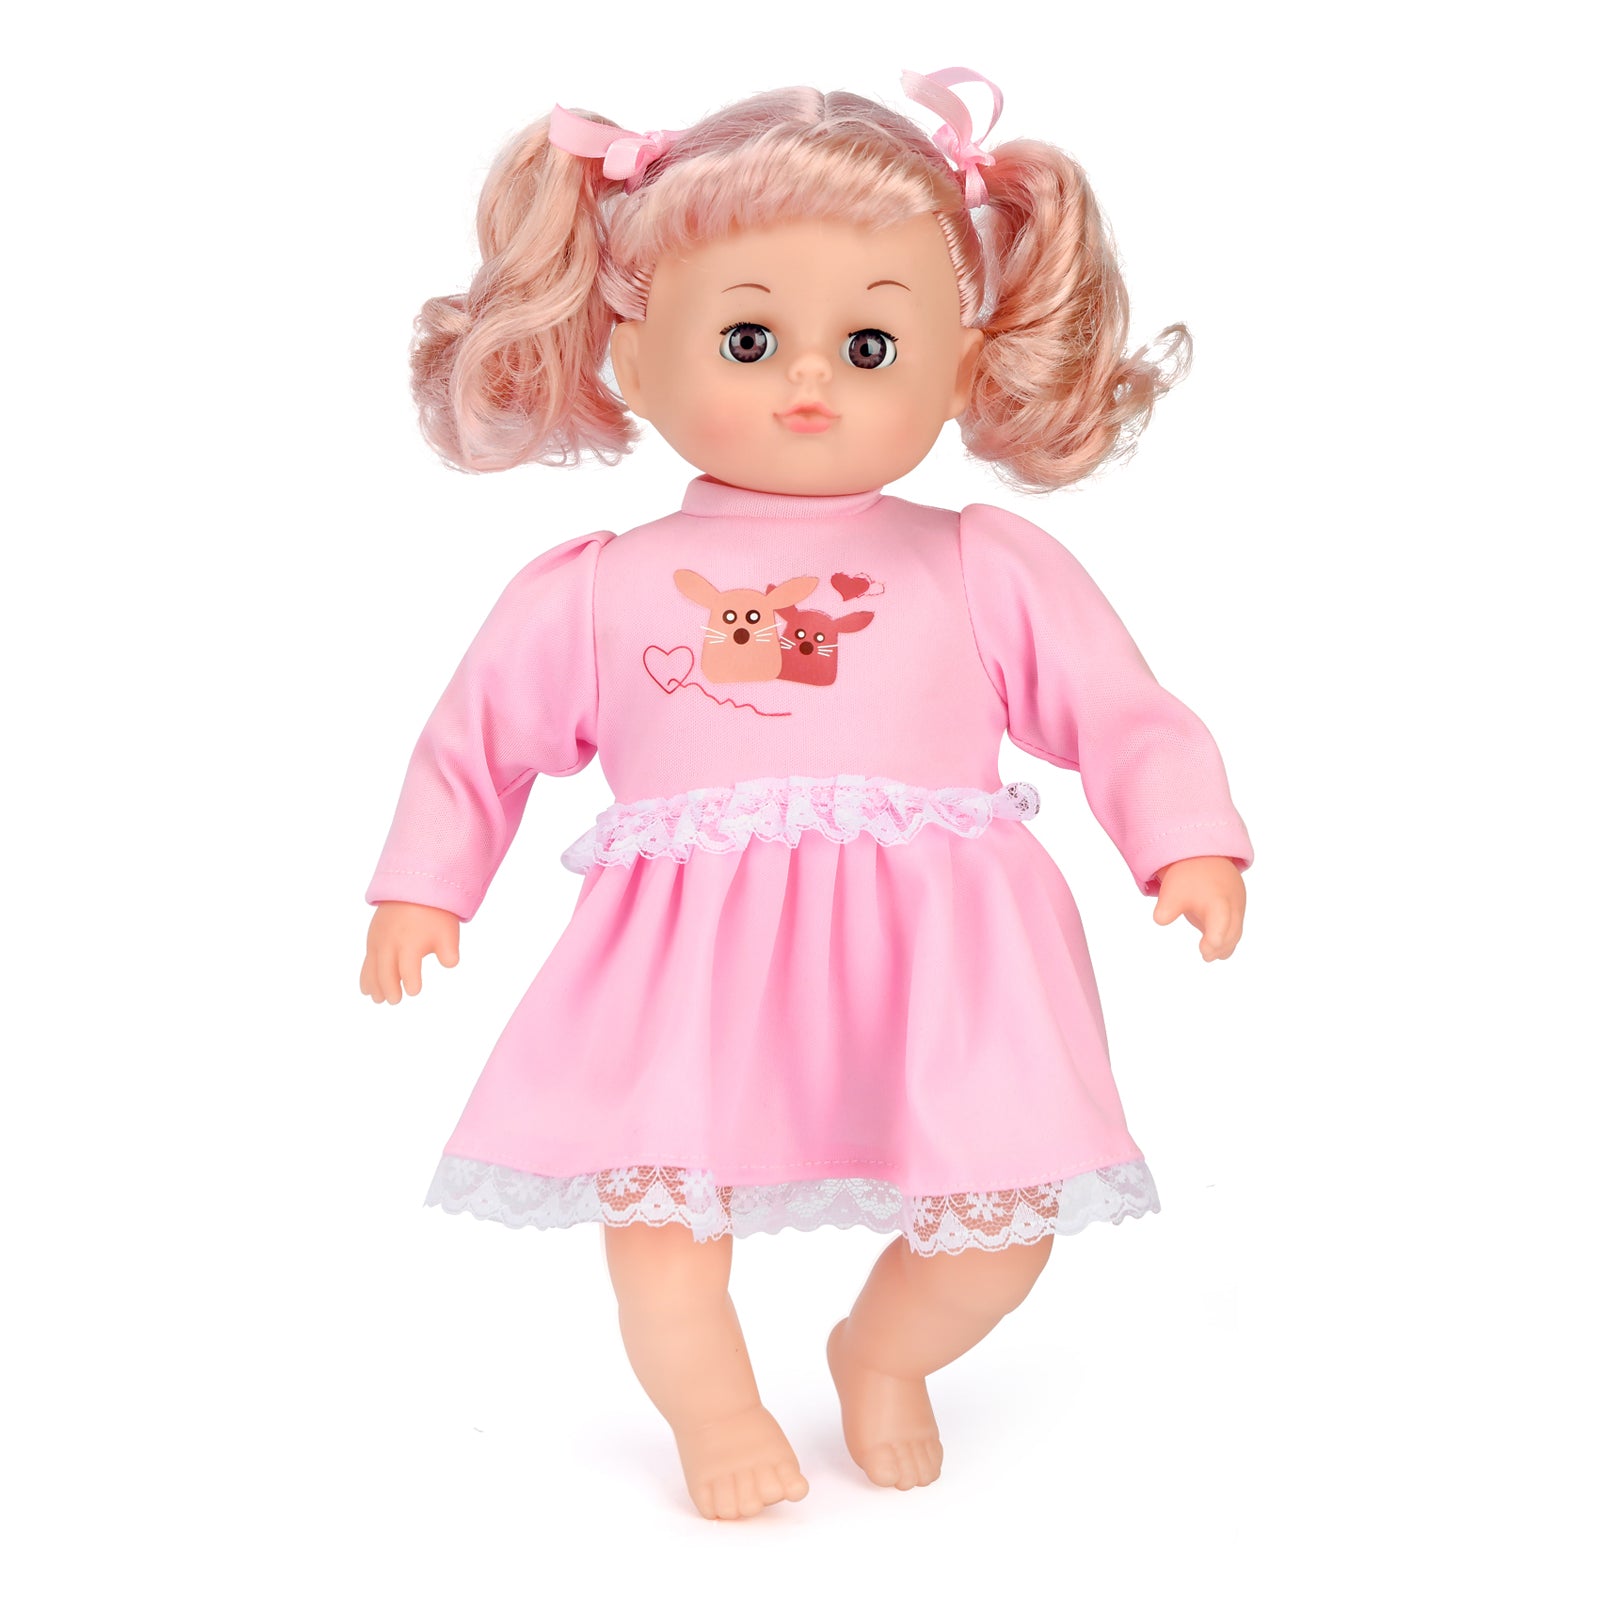 Bebamour Reborn Baby Doll 13.7inch for Toddlers Girls Soft Realistic Silicone Doll with Clothes for 1 Year old Kids Hand Made Doll Collection Toy Birthday Gift